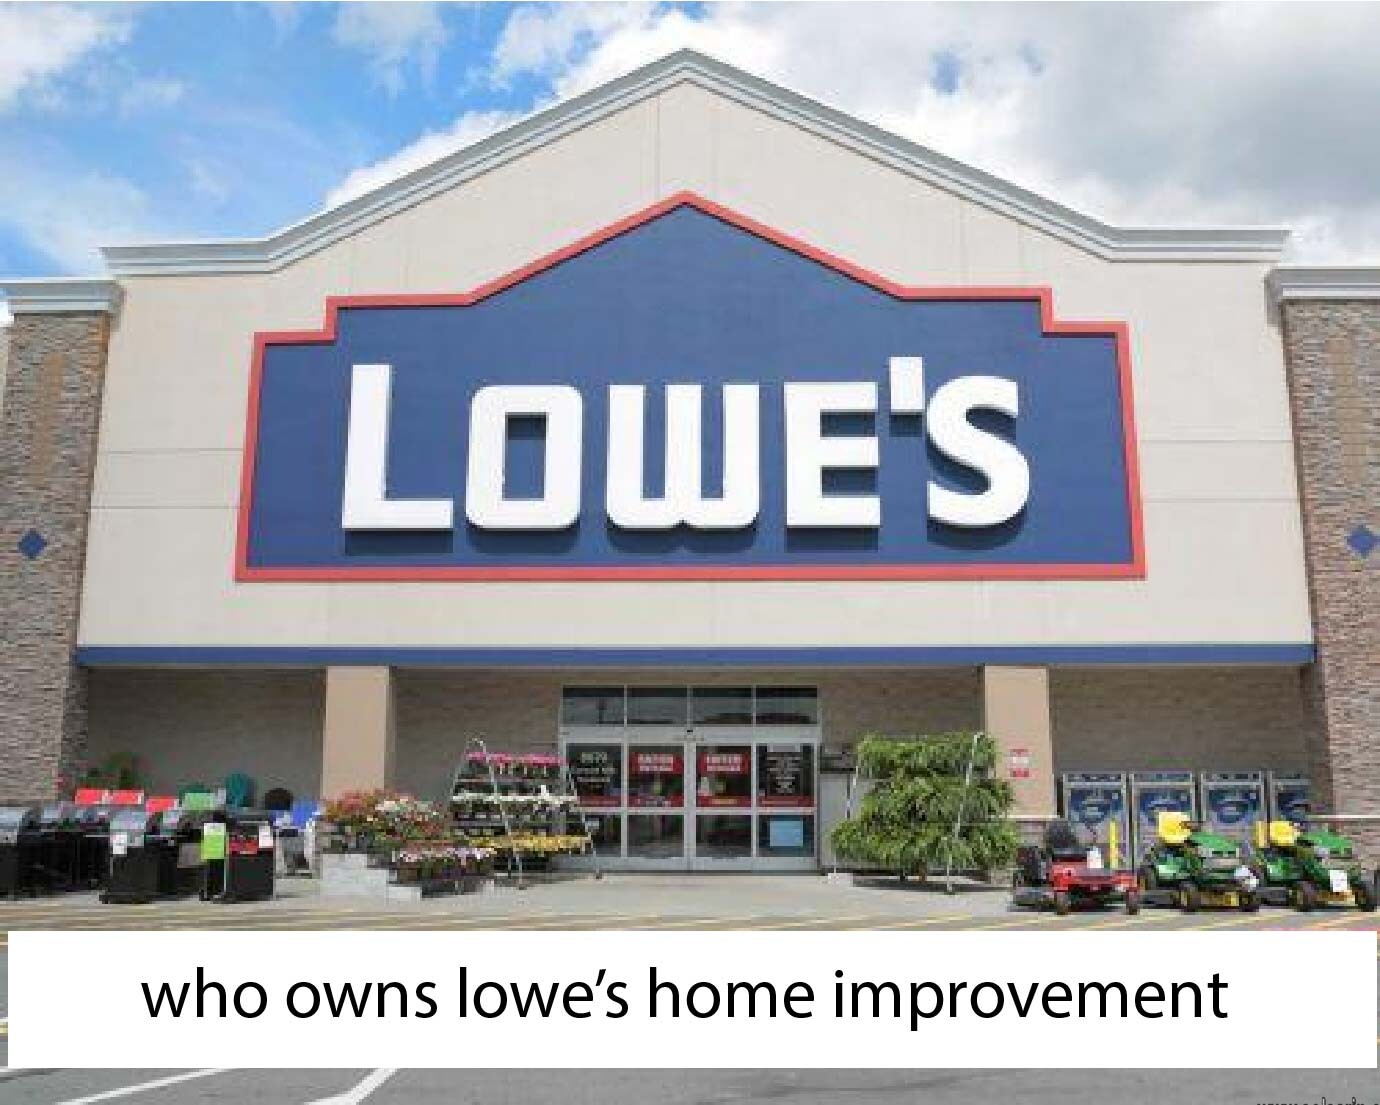 who owns lowes home improvement